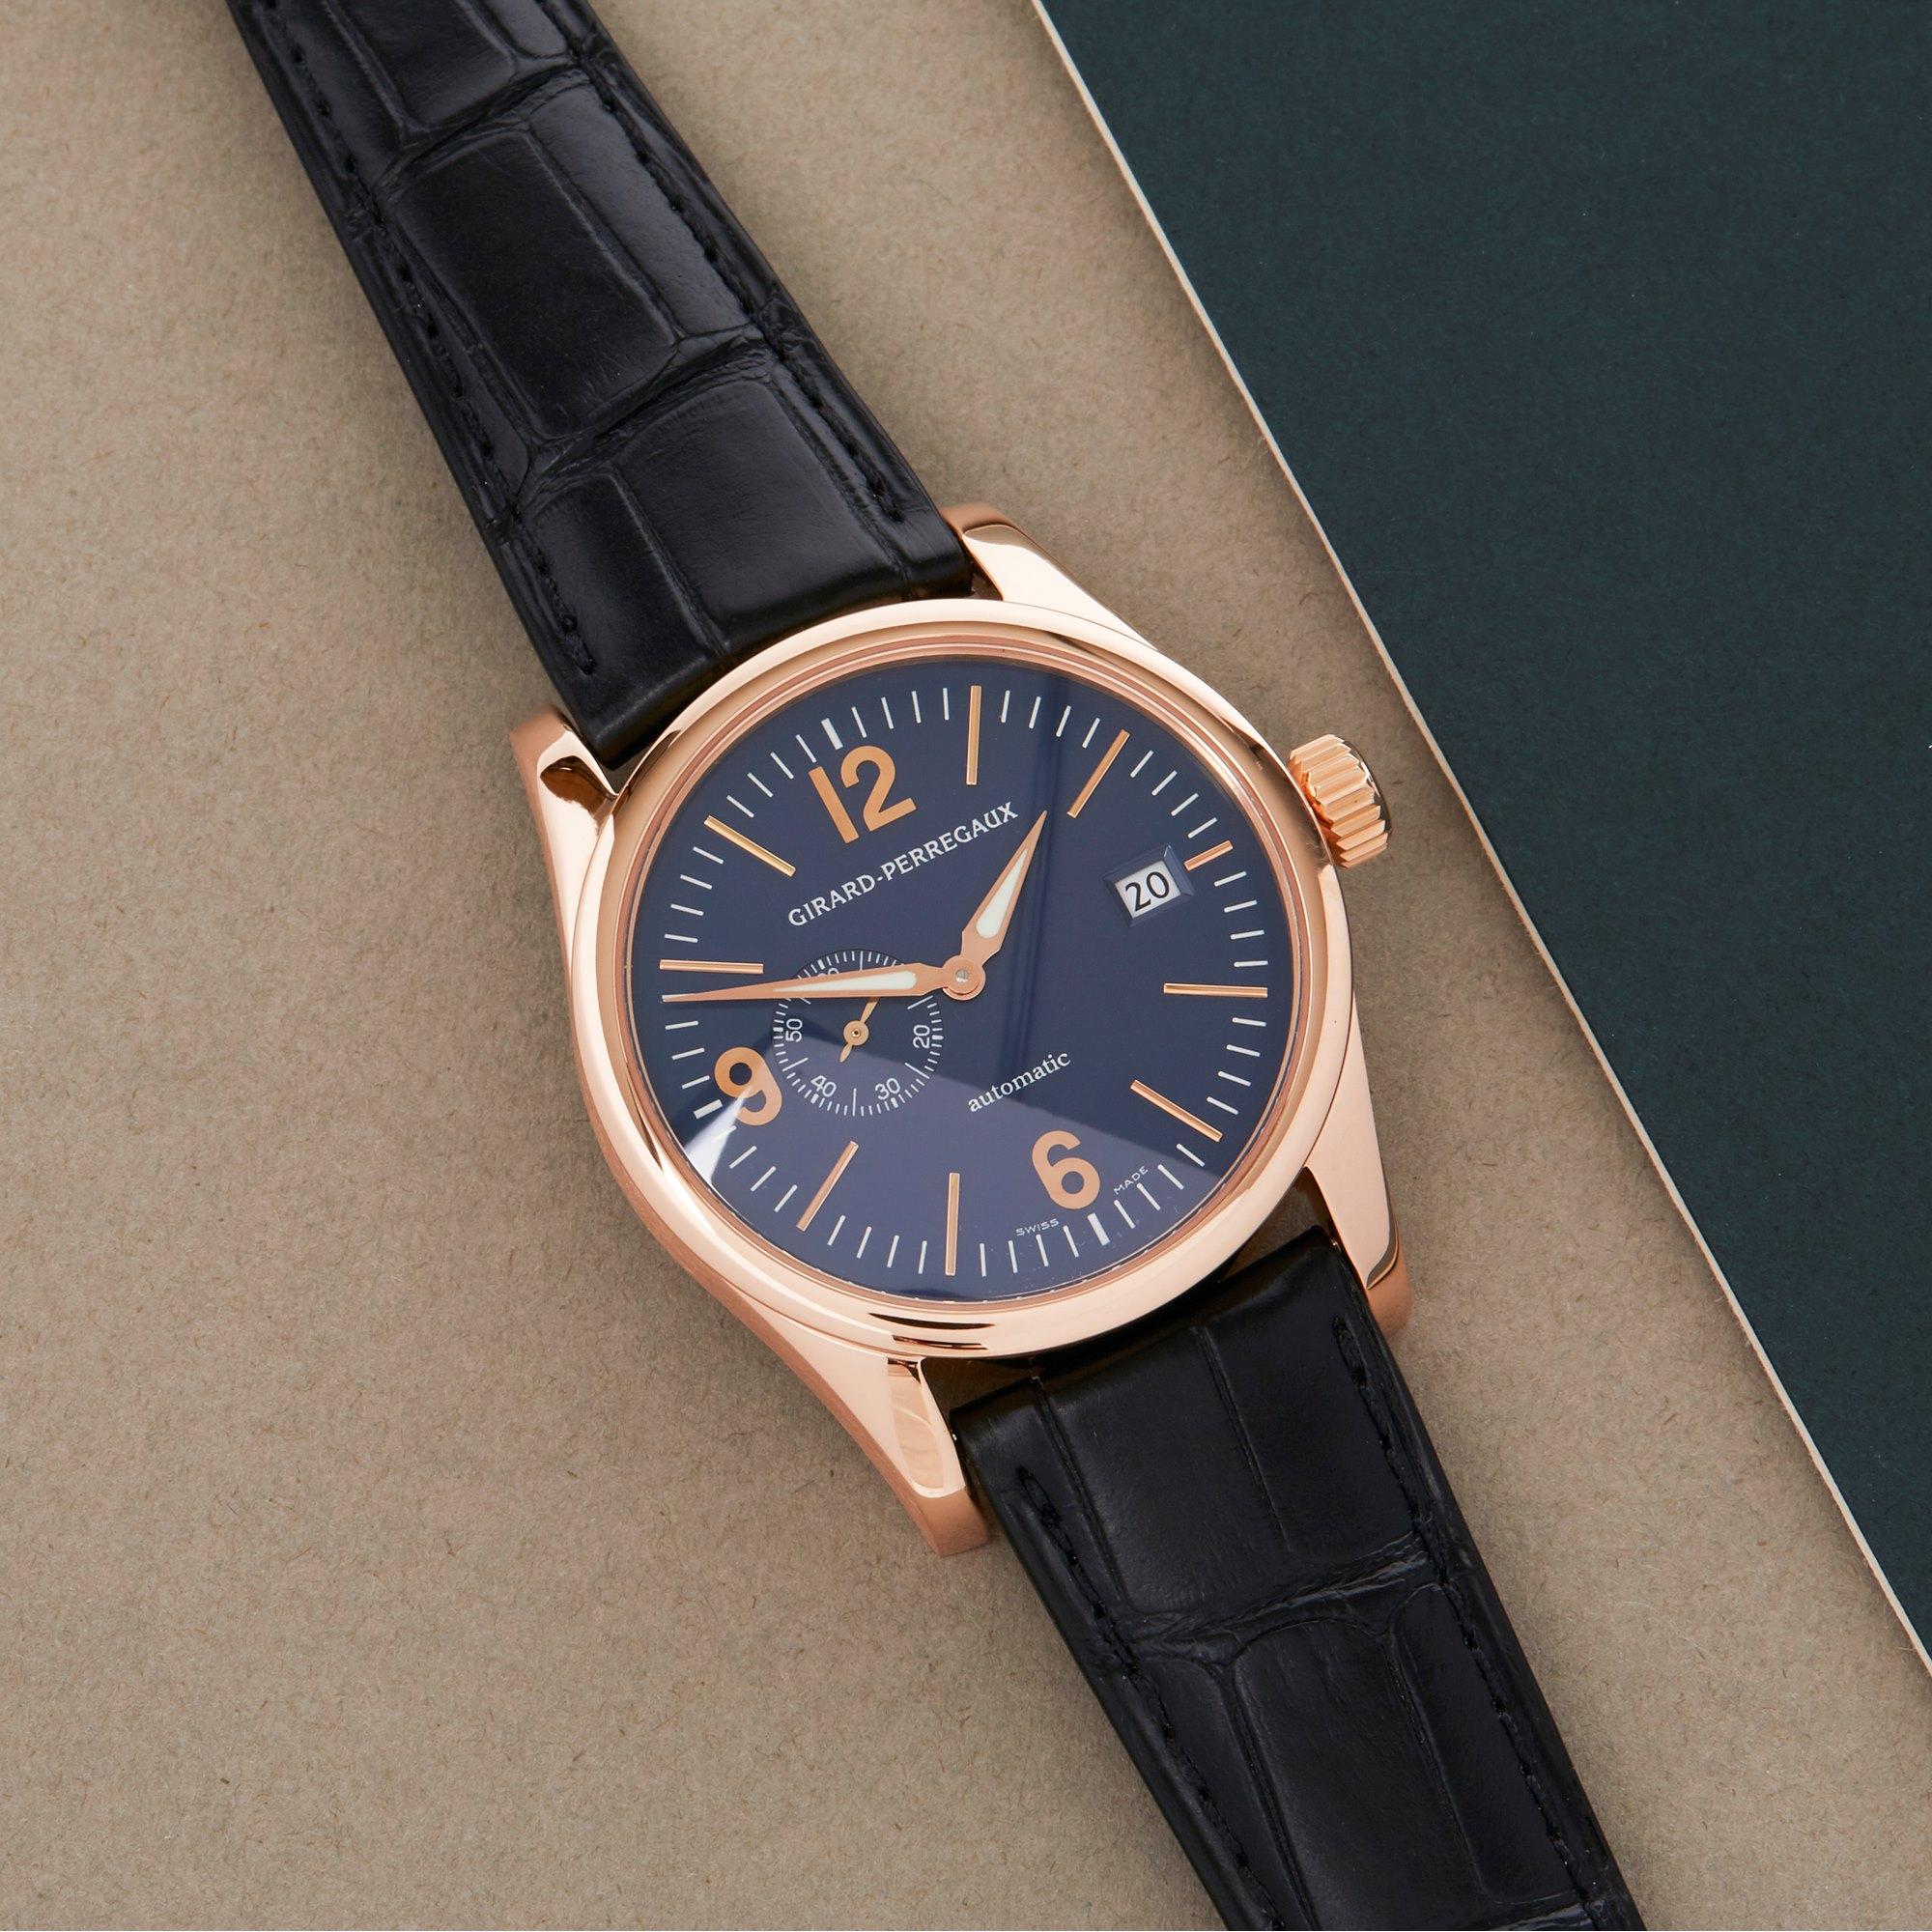 Xupes Reference: COM002429
Manufacturer: Girard Perregaux
Model: 1966
Model Variant: 0
Model Number: 4952
Age: 2010
Gender: Men
Complete With: Xupes Presentation Box 
Dial: Blue Other
Glass: Sapphire Crystal
Case Material: Rose Gold
Strap Material: